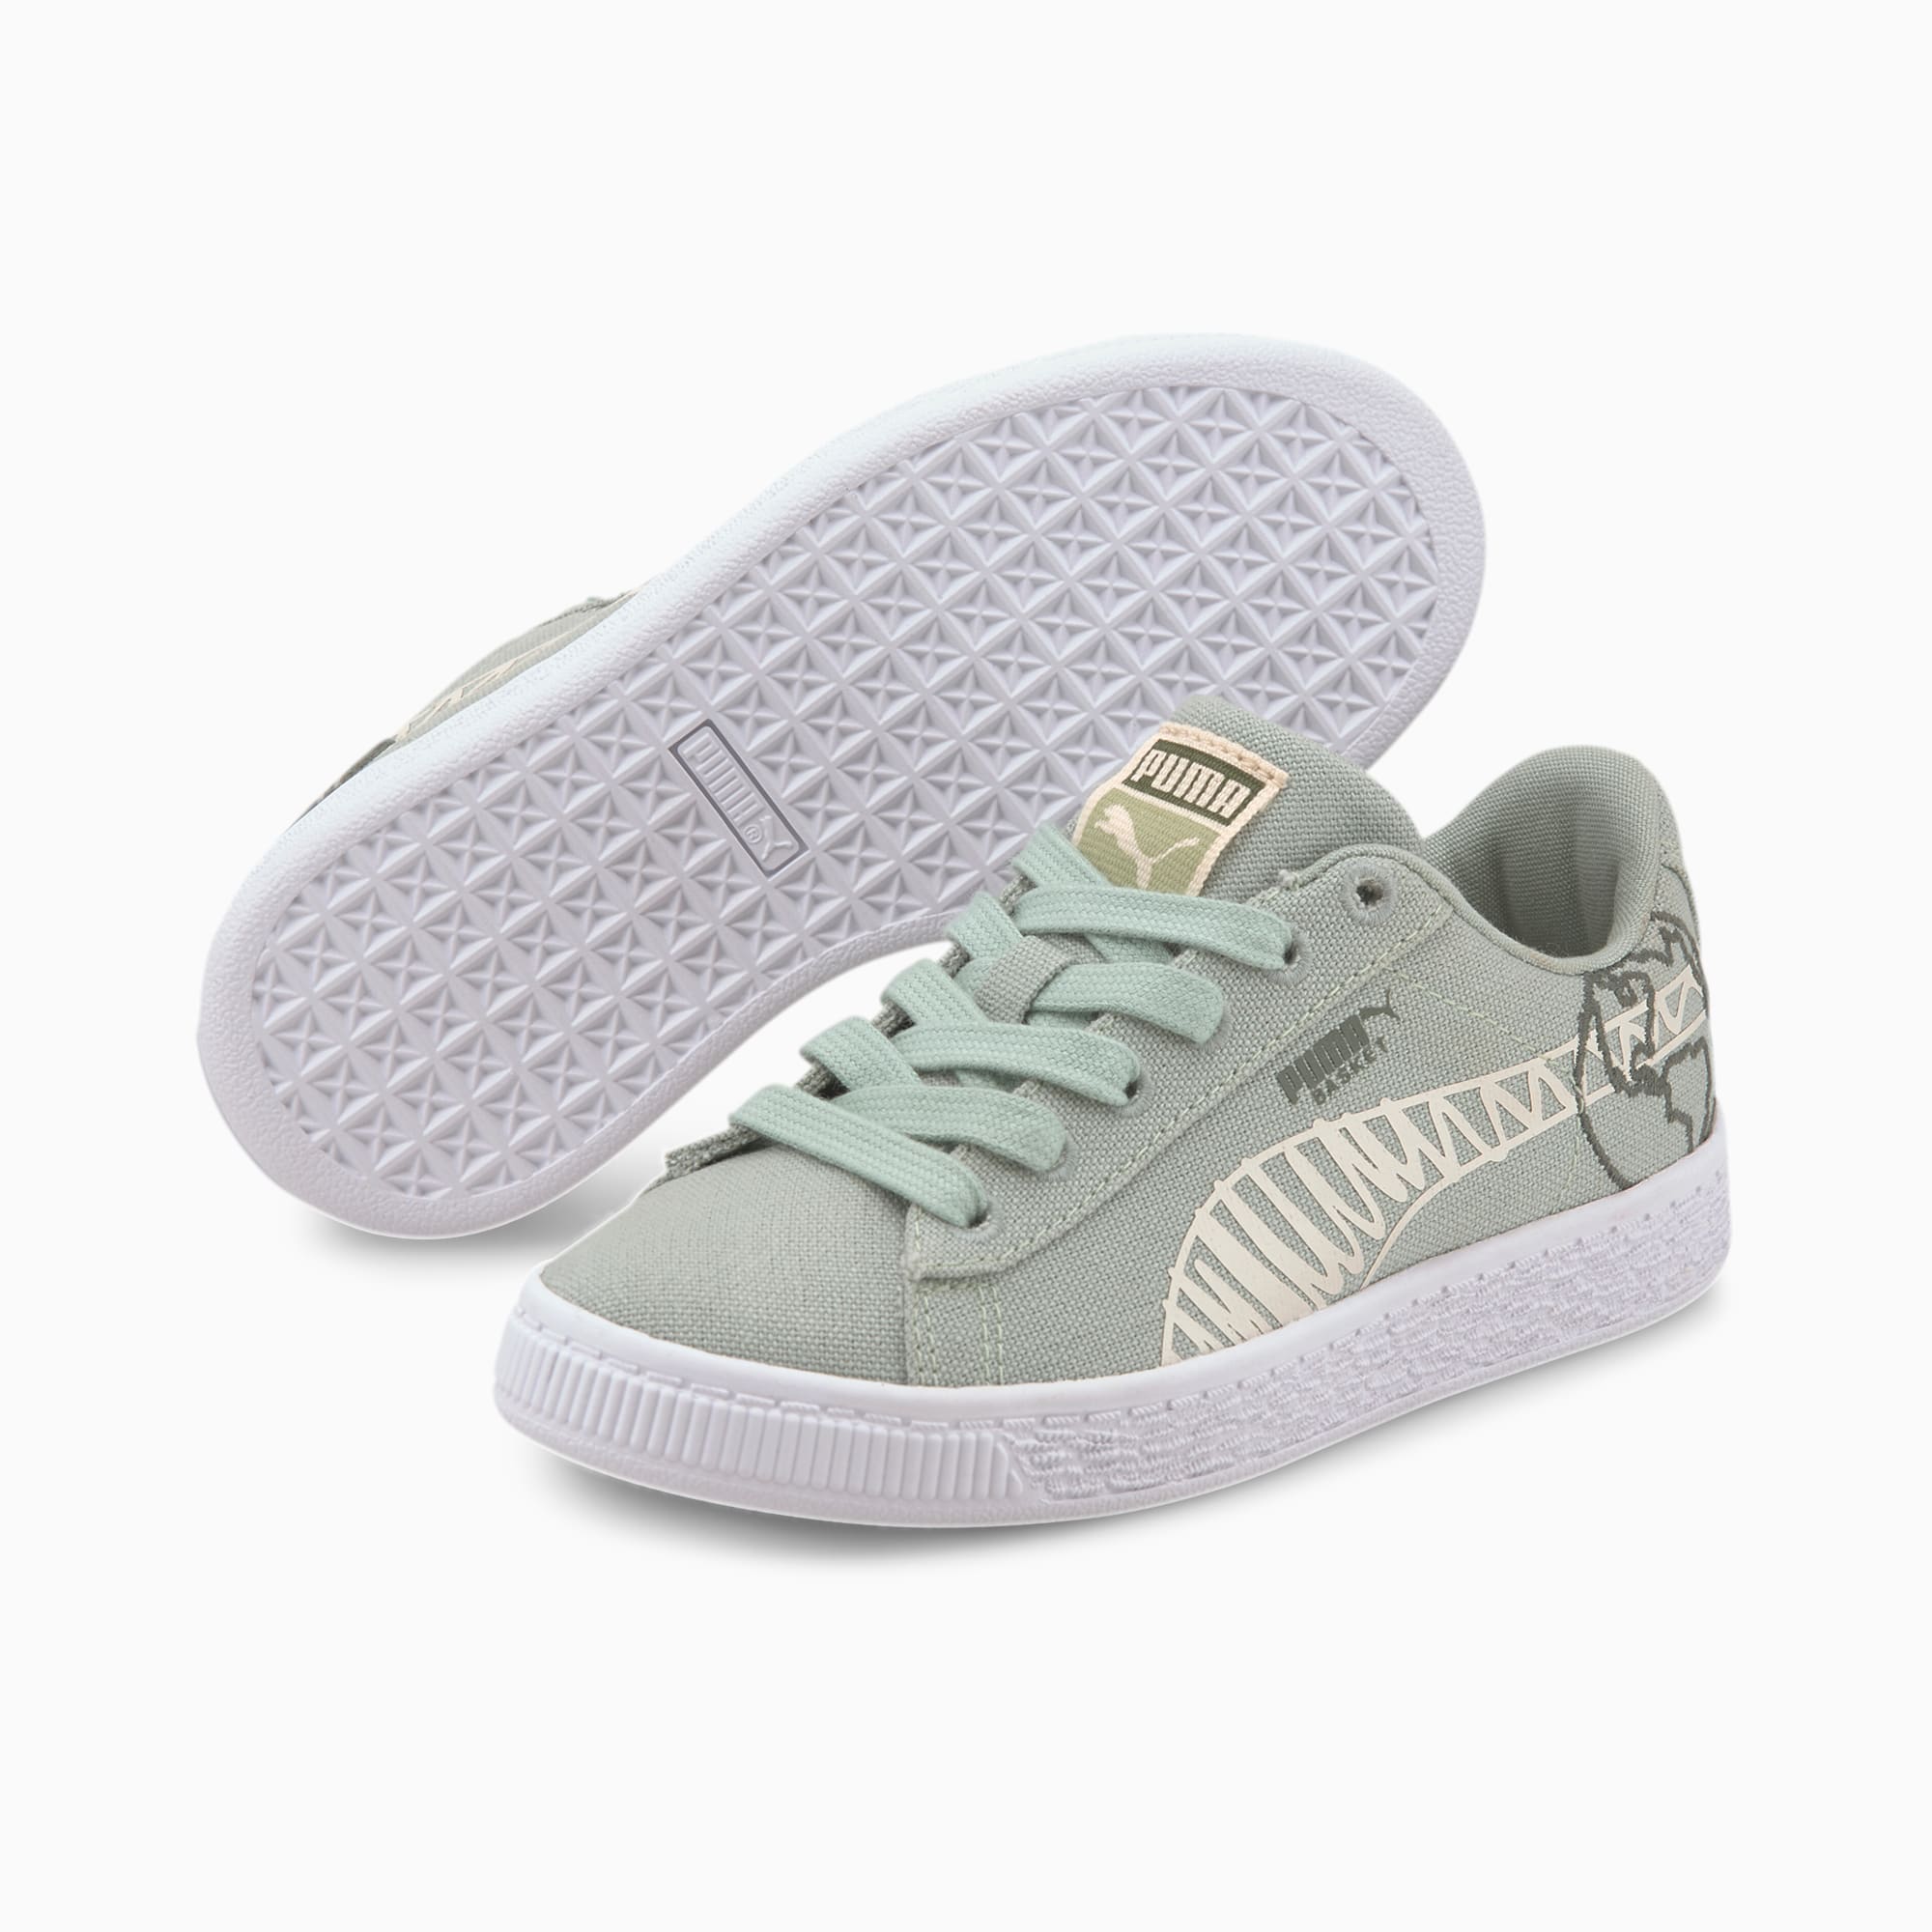 puma canves shoes